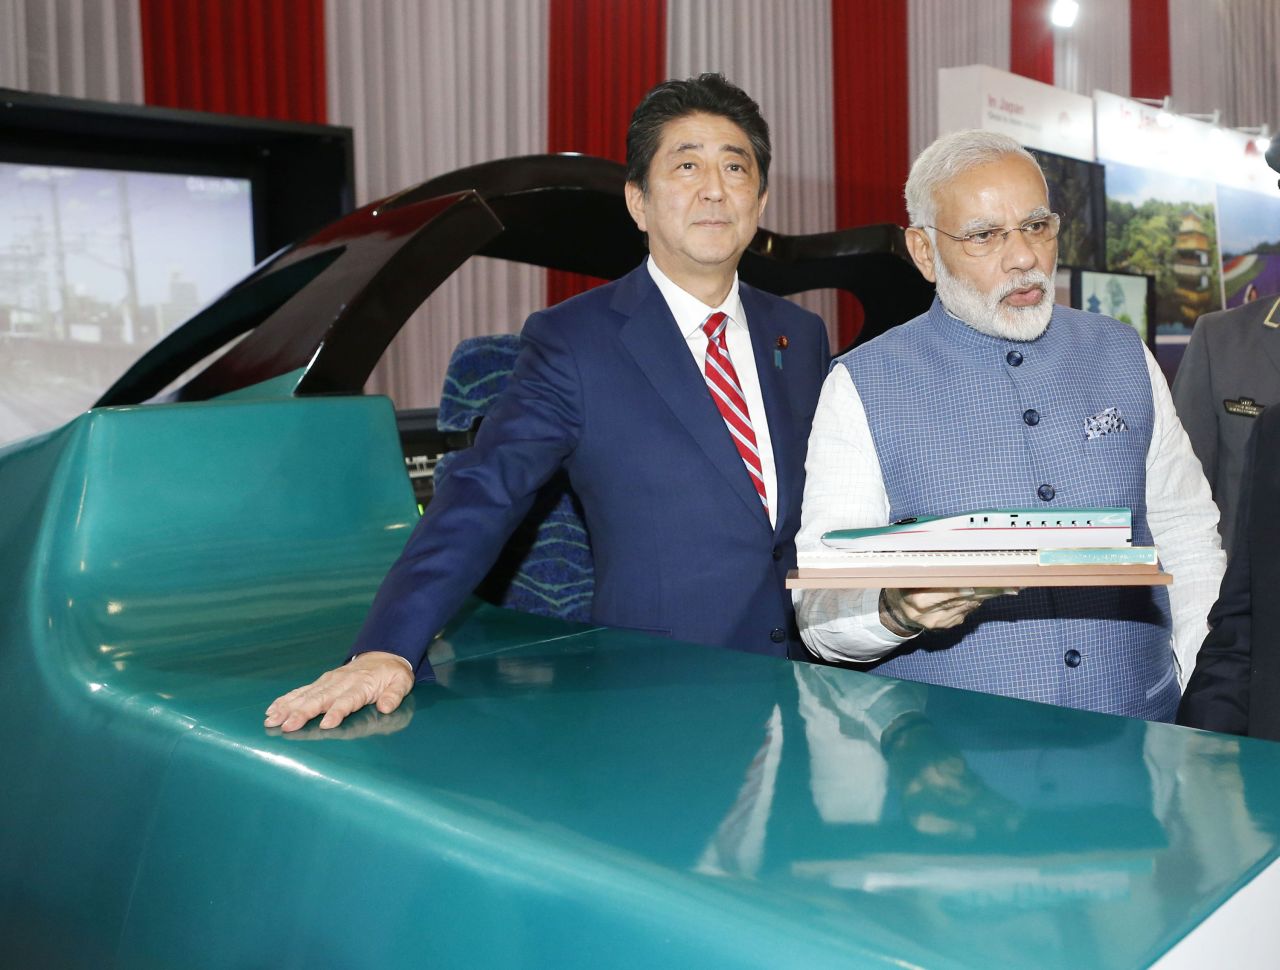 Former Japanese Prime Minister Shinzo Abe and Indian Prime Minister Narendra Modi pose in front of a high-speed train simulator in Gandhinagar, India, on September 14, 2017. 